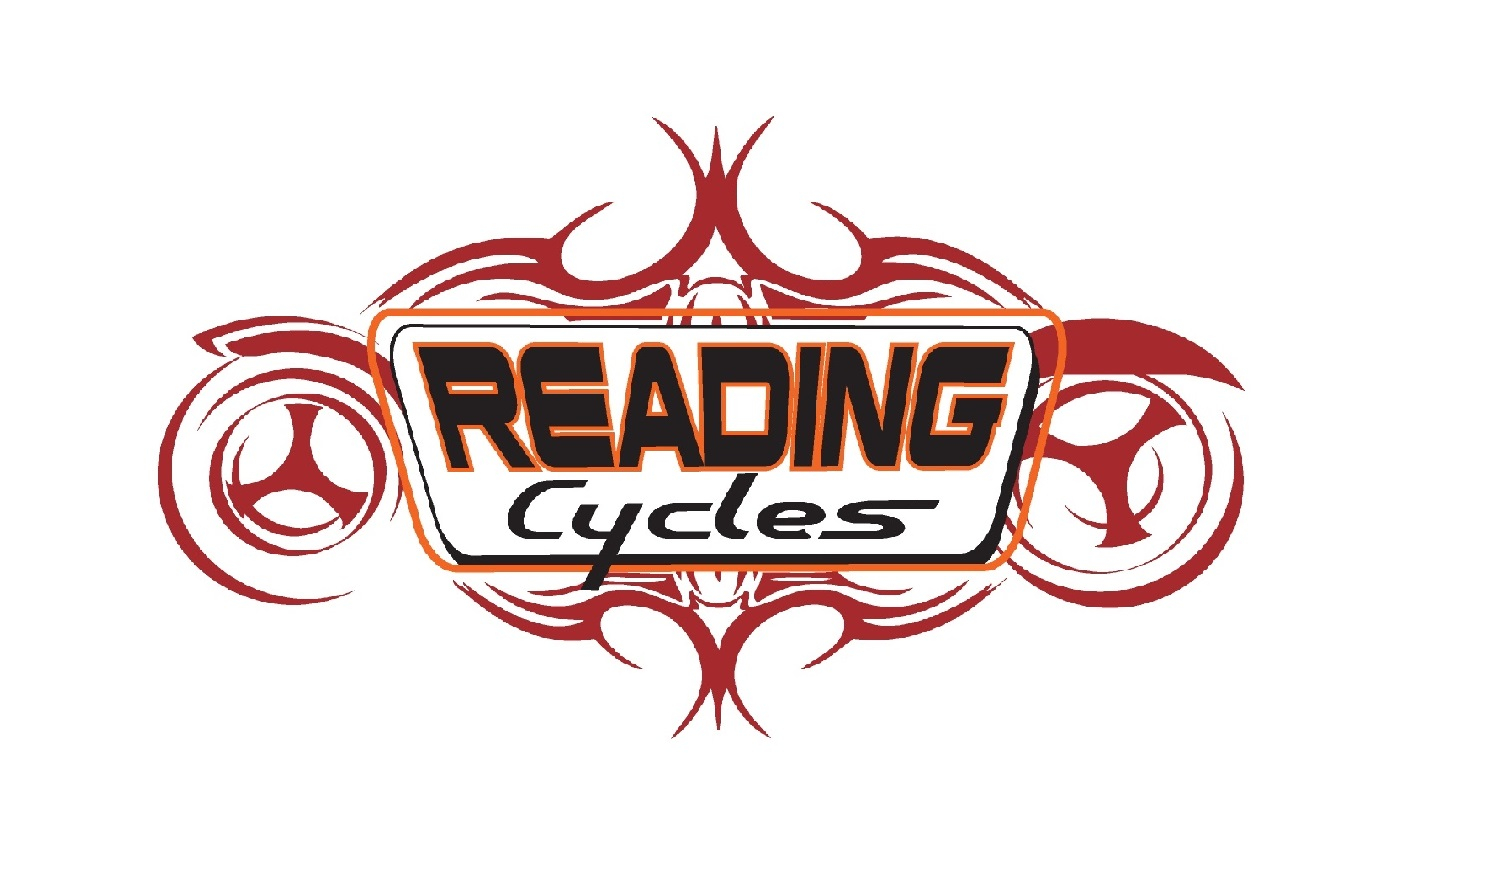 Reading Cycles